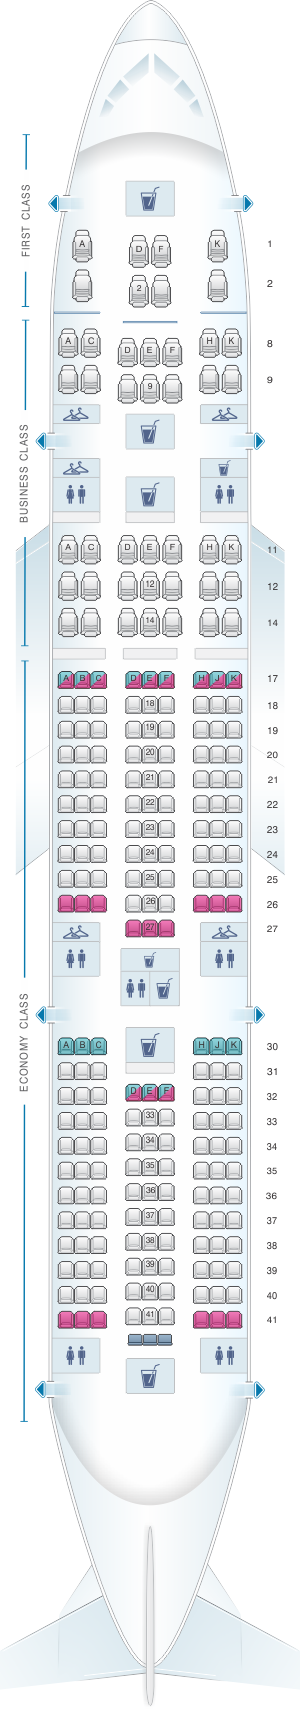 Seat map for Air India Boeing B777 200LR